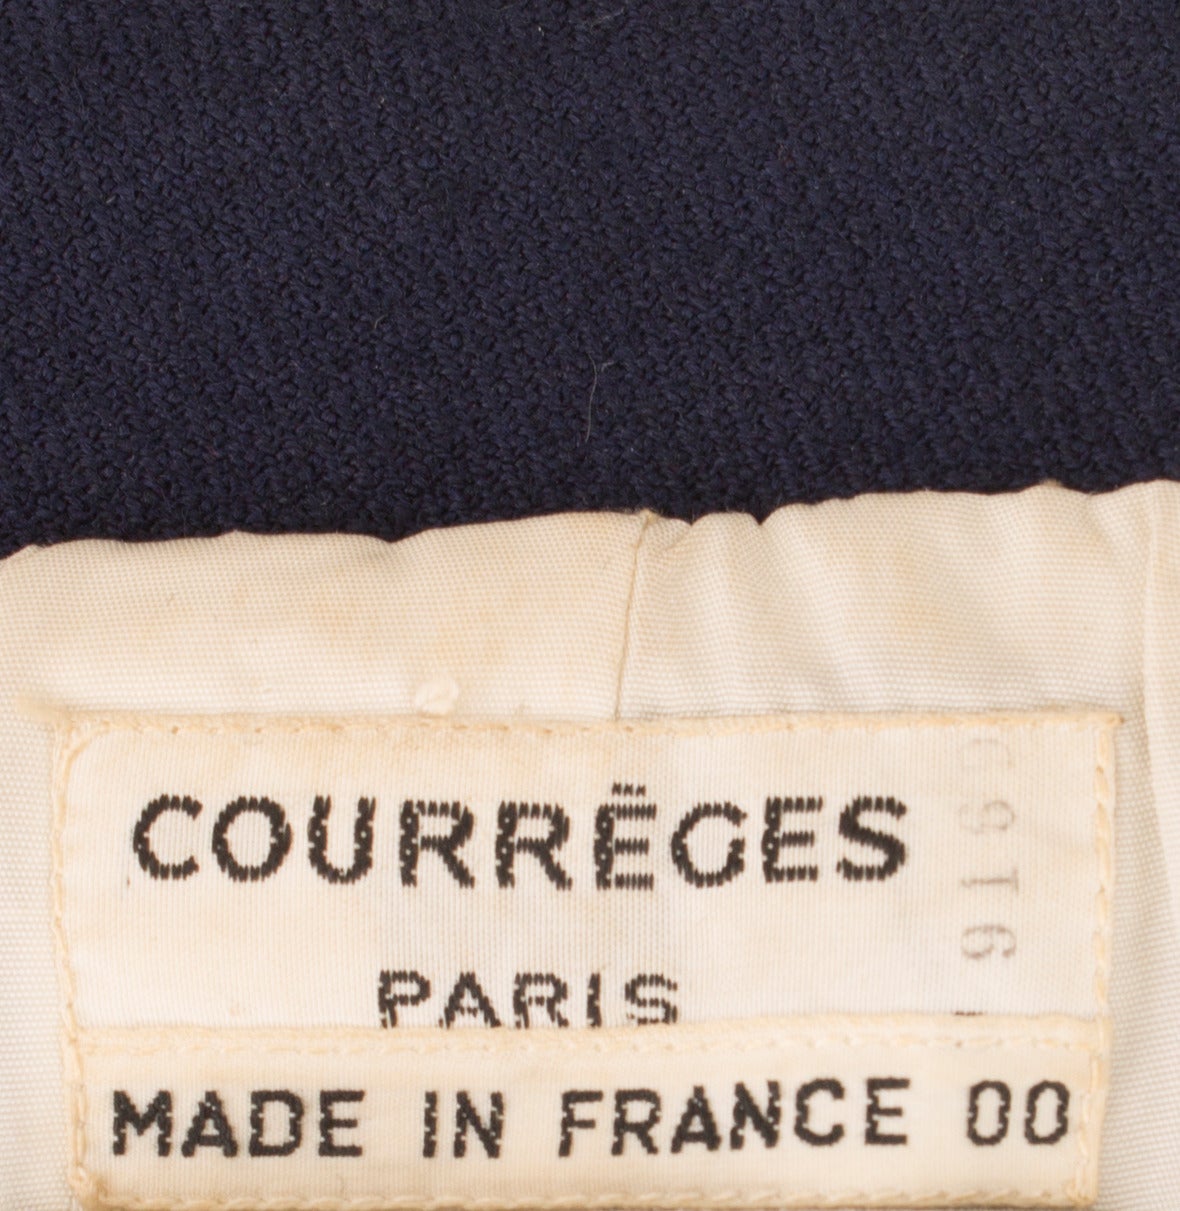 A Courrèges haute couture jacket, circa 1968 For Sale at 1stdibs